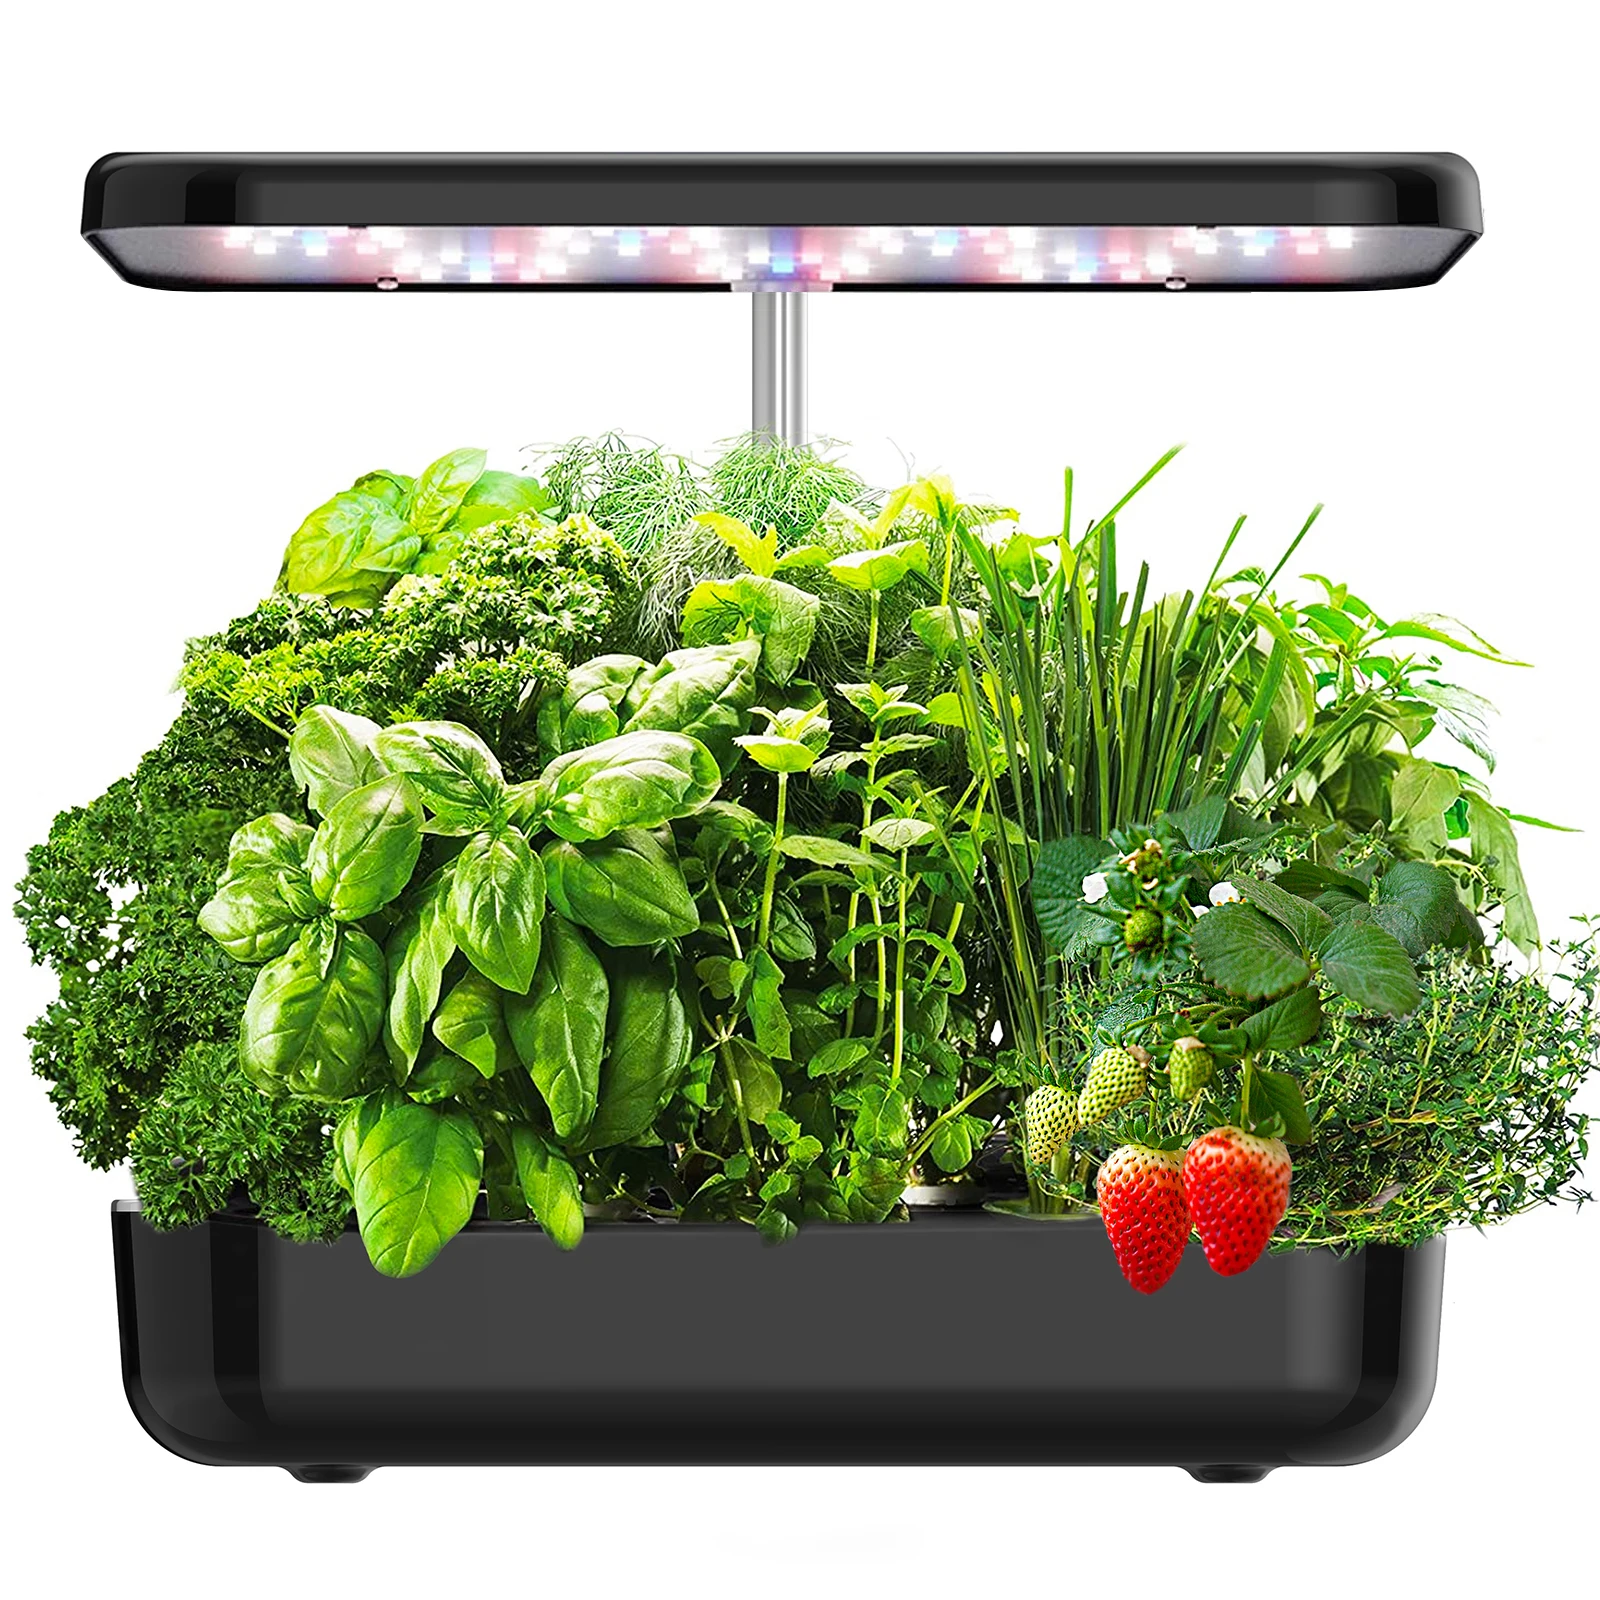 

Hydroponic Growing Systems 6pcs Grow Net Pots Full Spectrum led Grow Lights Garden Greenhouse Indoor Hydroponic Office Plant